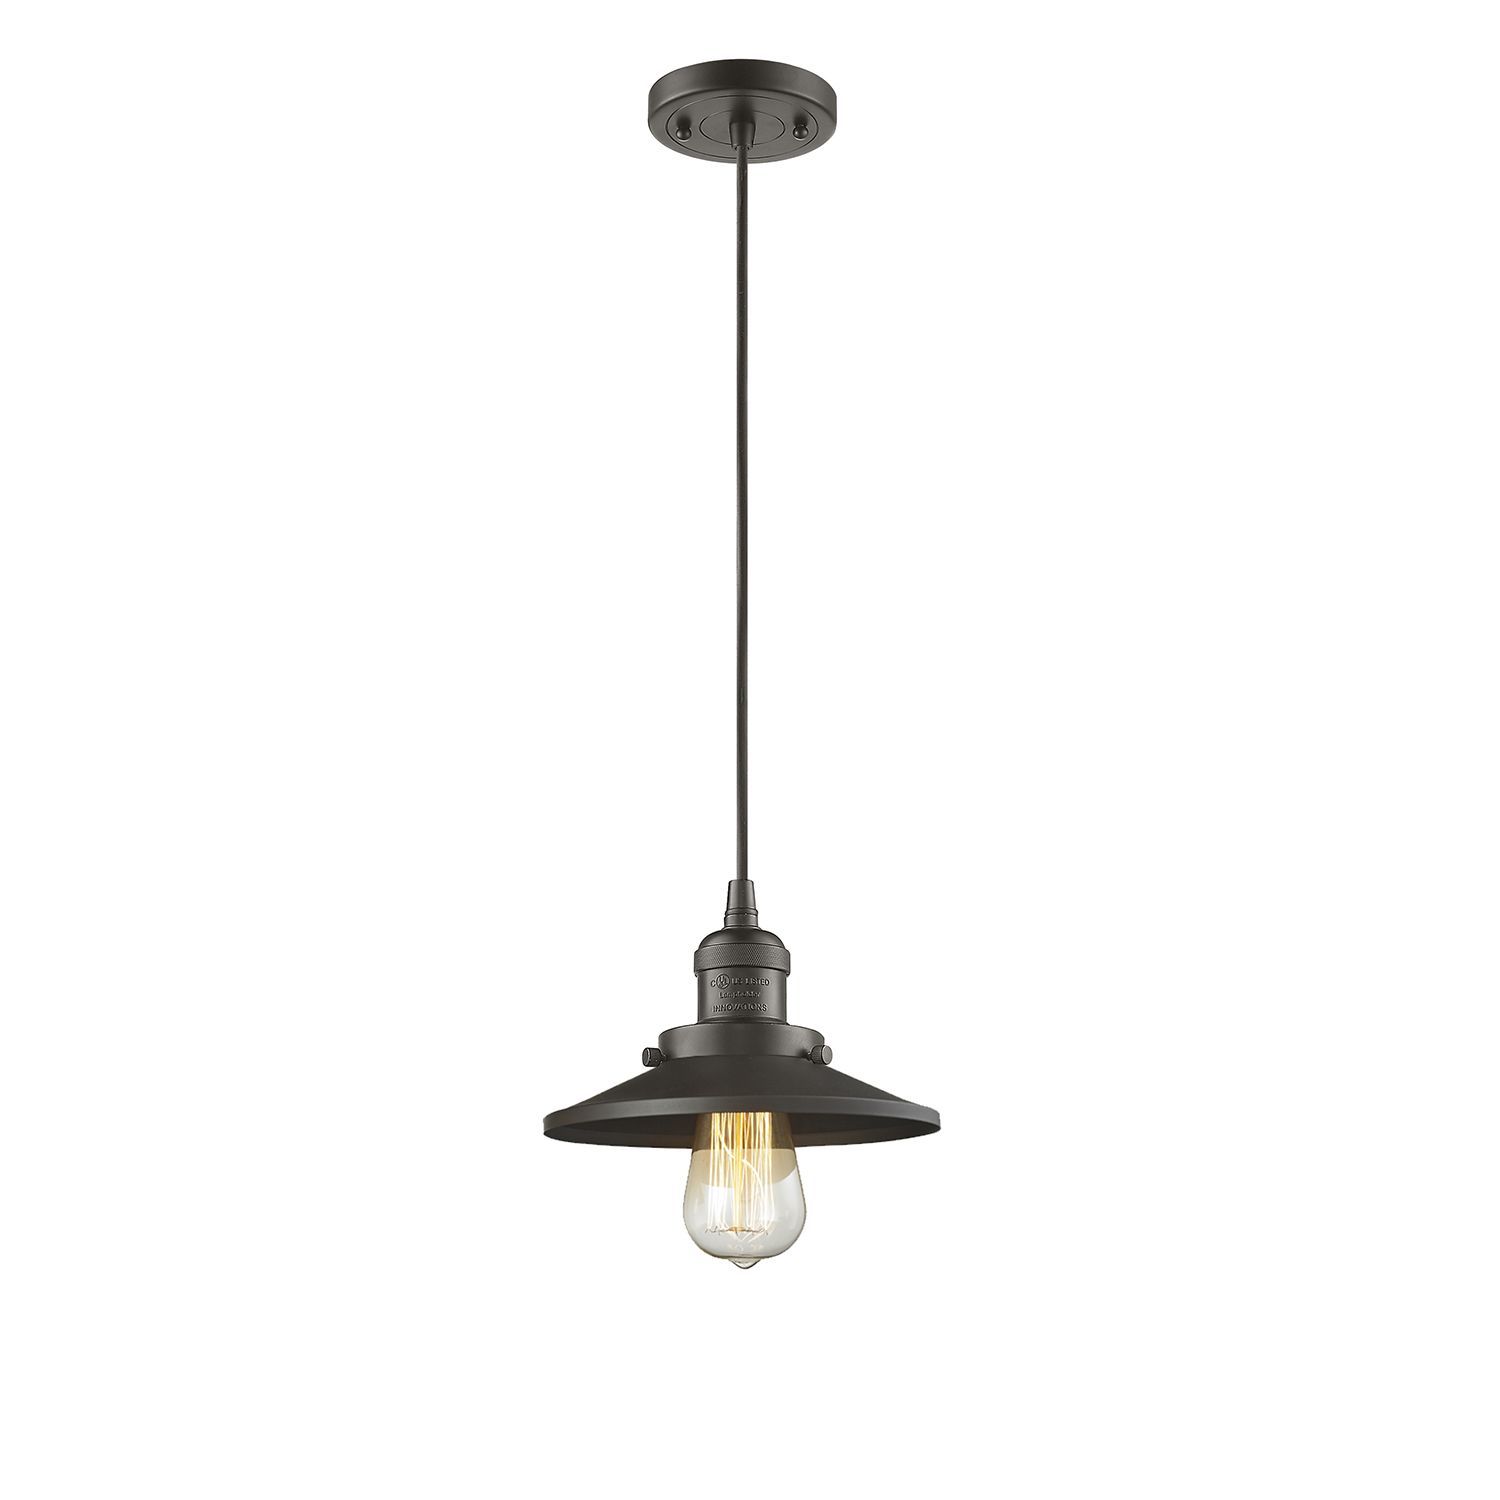 Innovations Lighting Railroad Oiled Rubbed Bronze Eight Inch In Nadine 1 Light Single Schoolhouse Pendants (View 27 of 30)